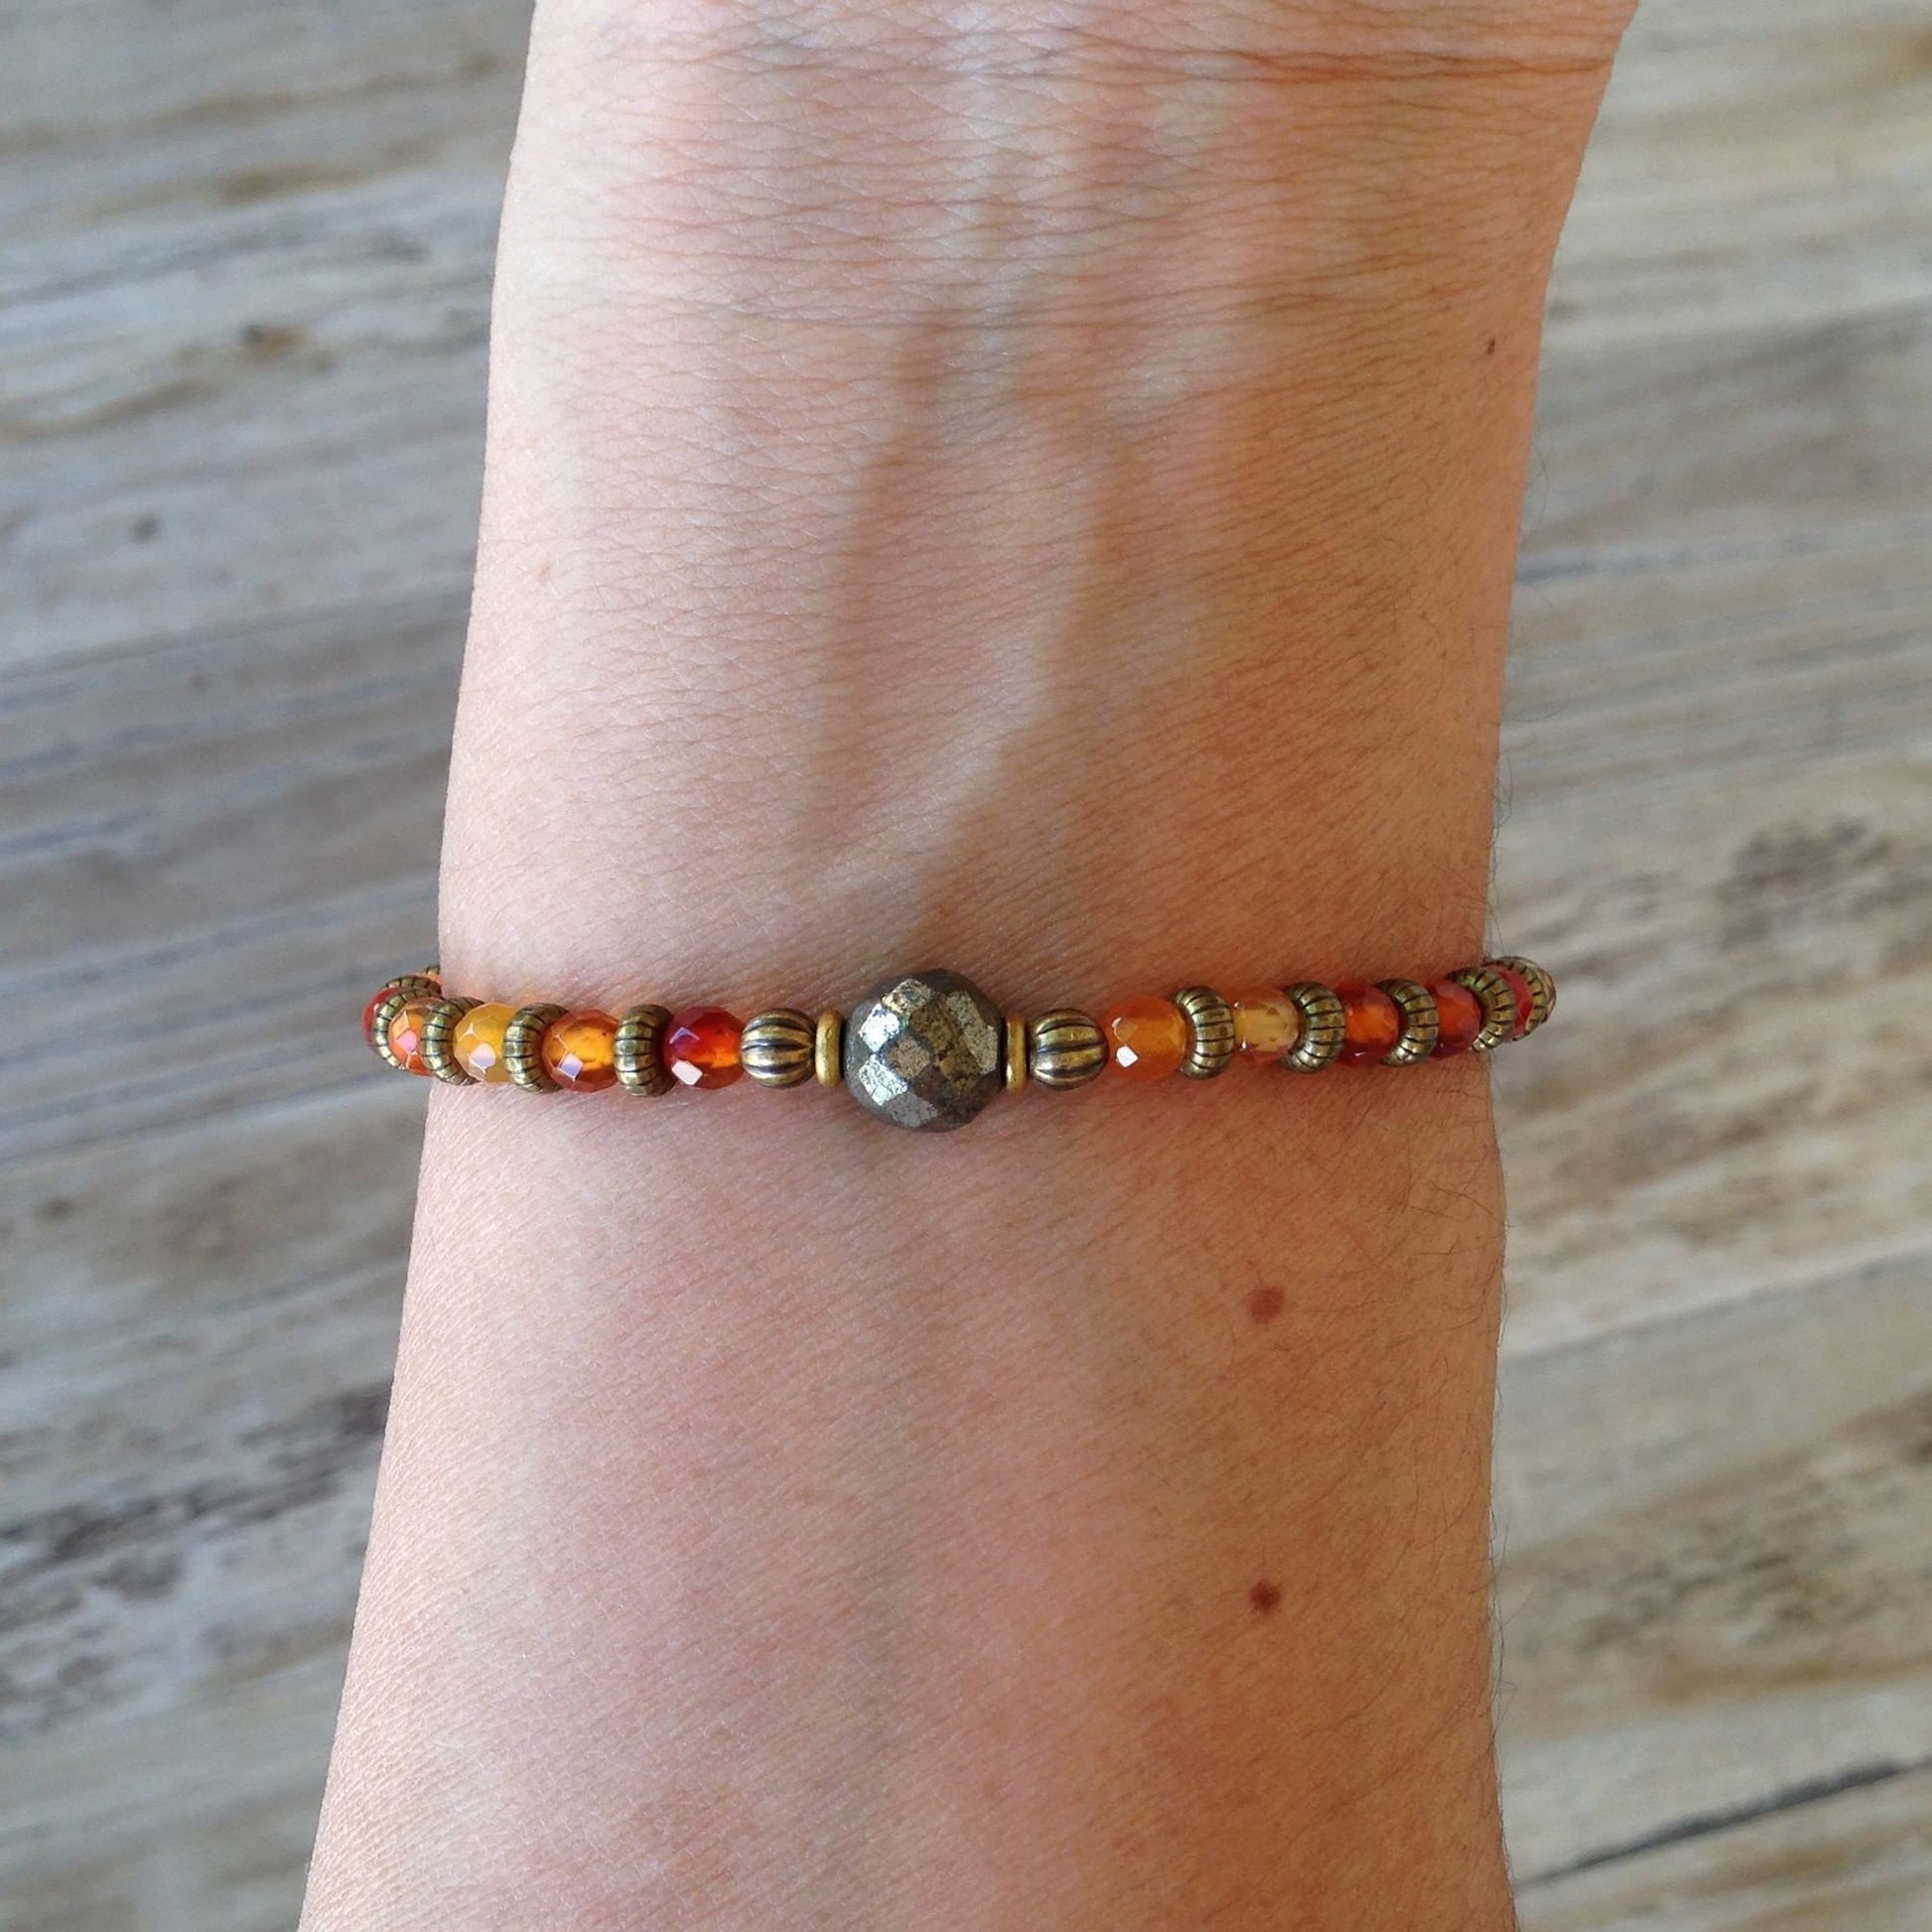 Bracelets - Carnelian And Pyrite Fine Faceted "Stability And Confidence" Bracelet